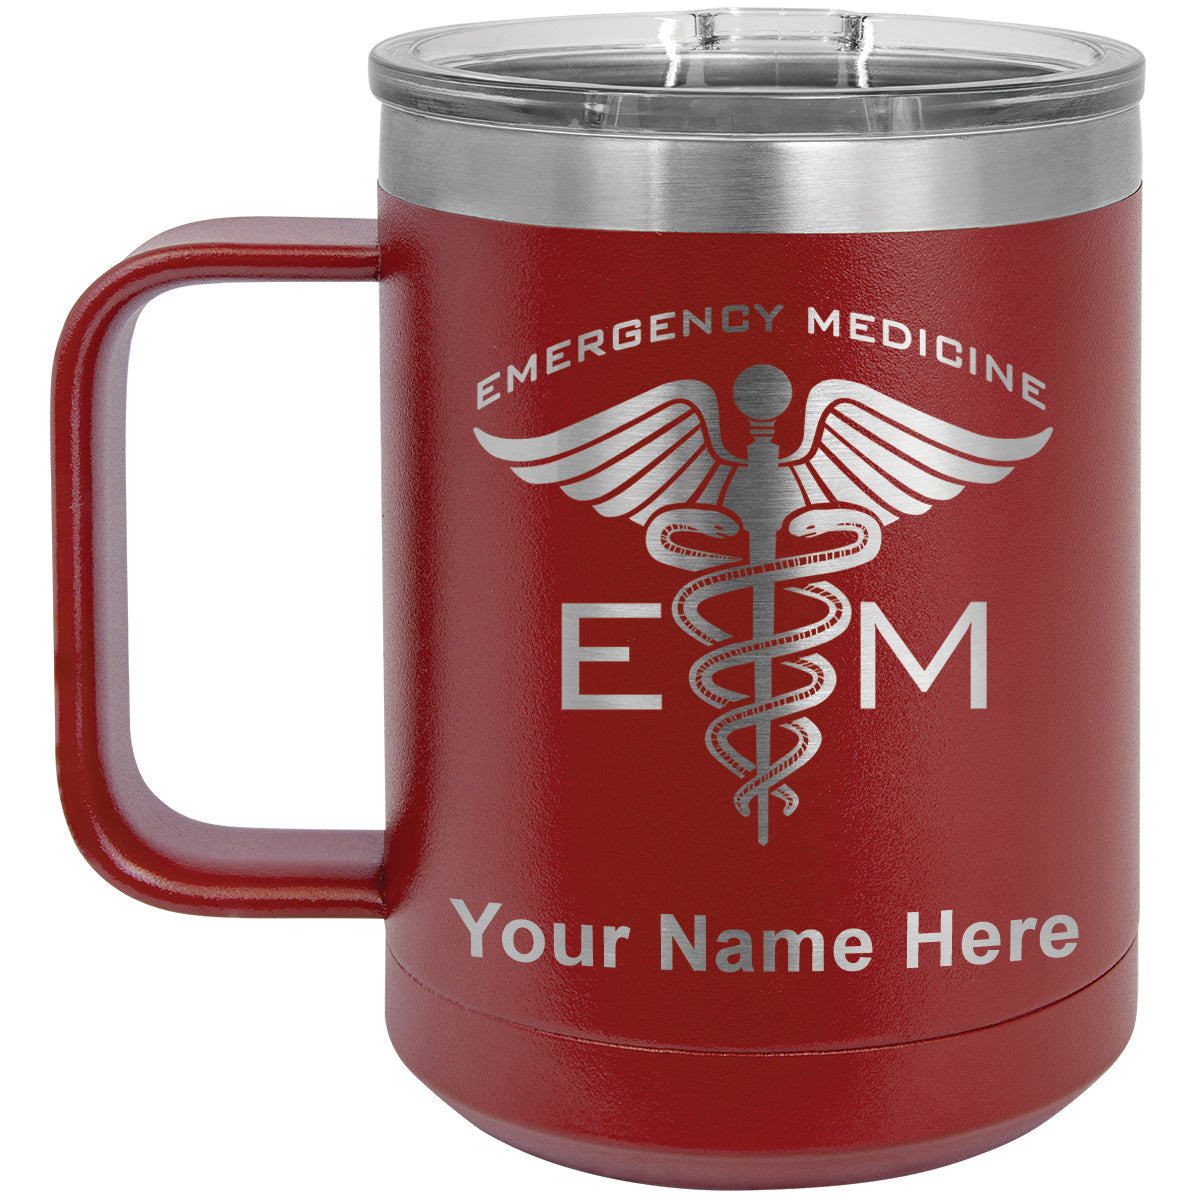 15oz Vacuum Insulated Coffee Mug, Emergency Medicine, Personalized Engraving Included